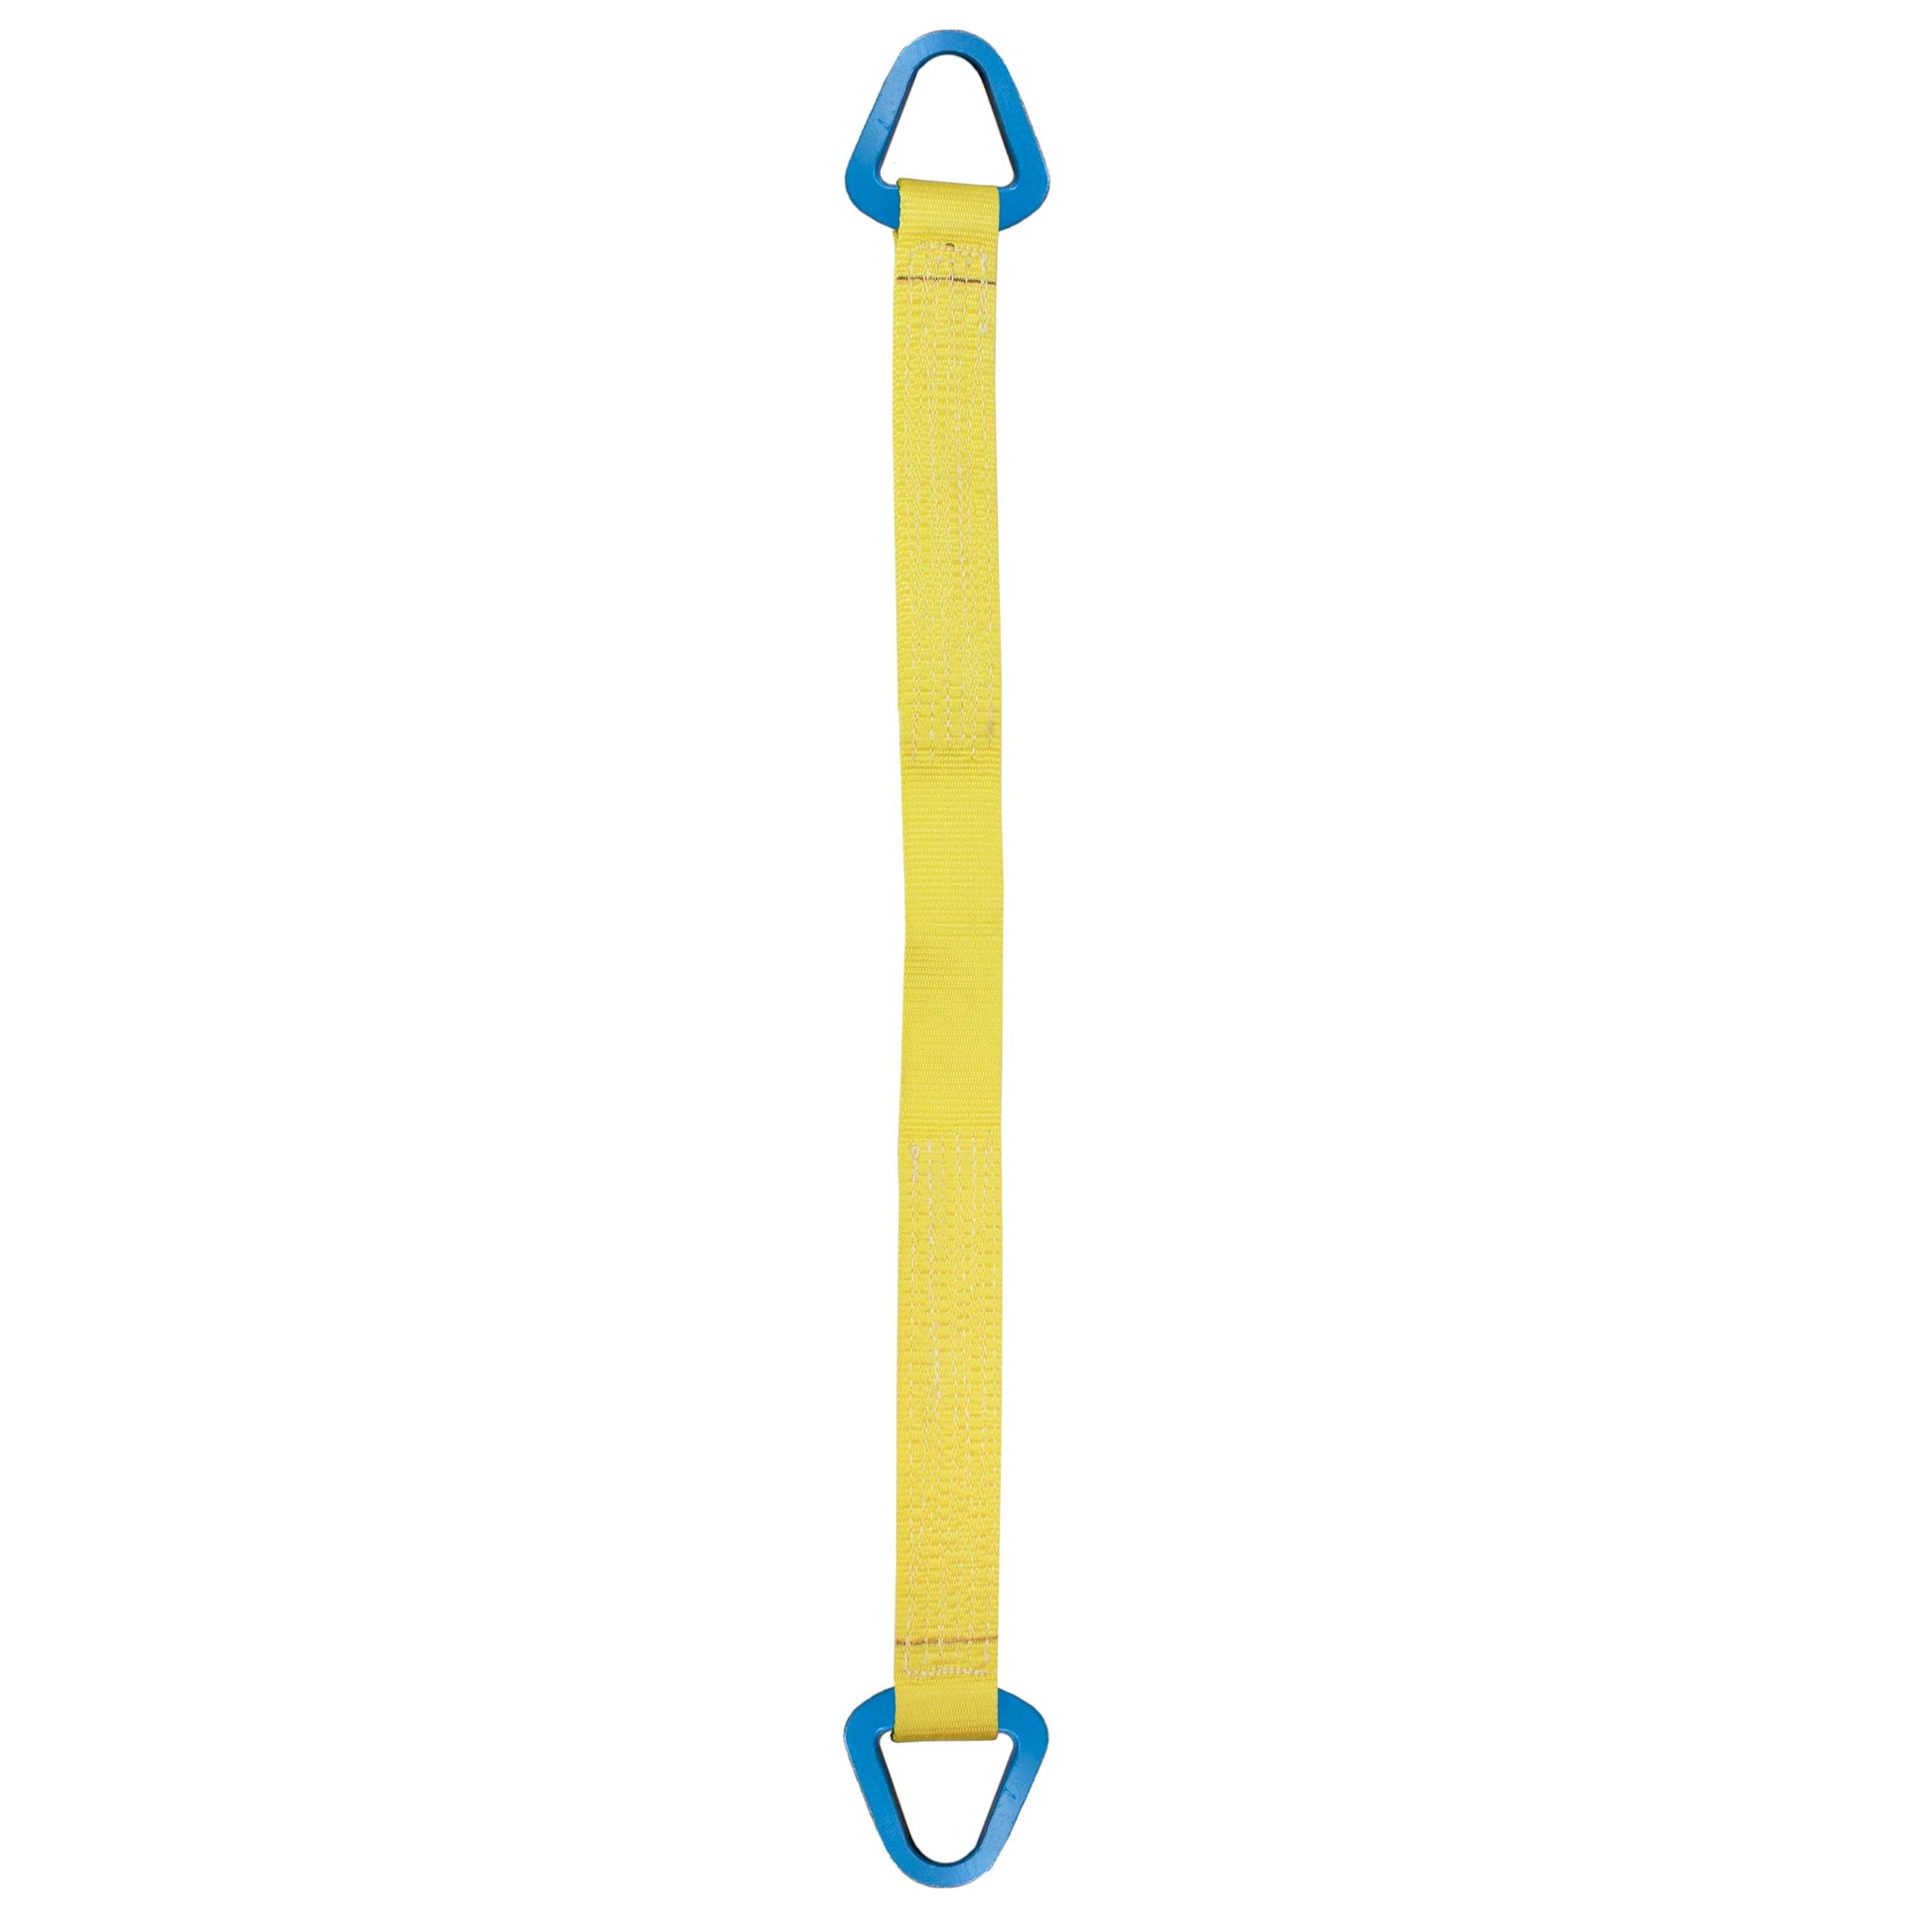 Nylon Lifting Sling Triangle 10 inch x 20 foot 1ply image 1 of 2